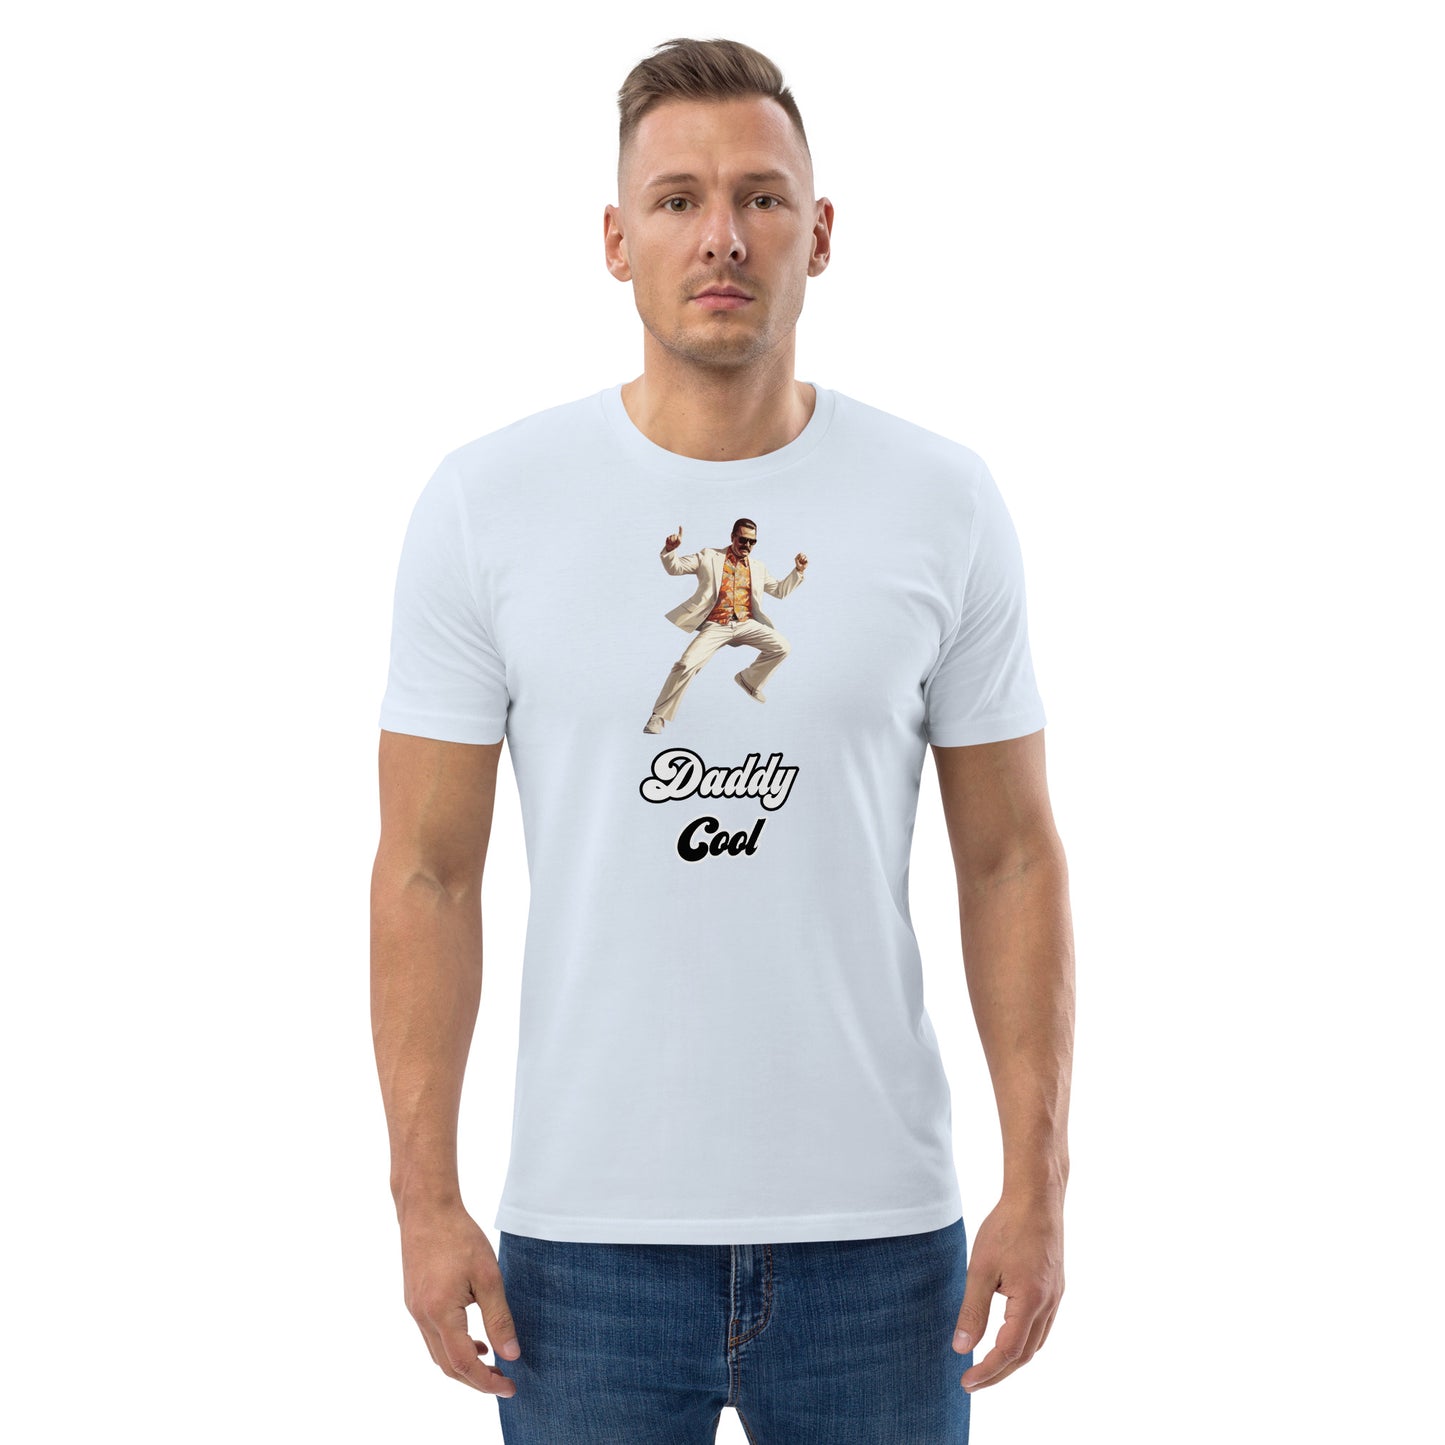 T-shirt Unisex - Daddy cool